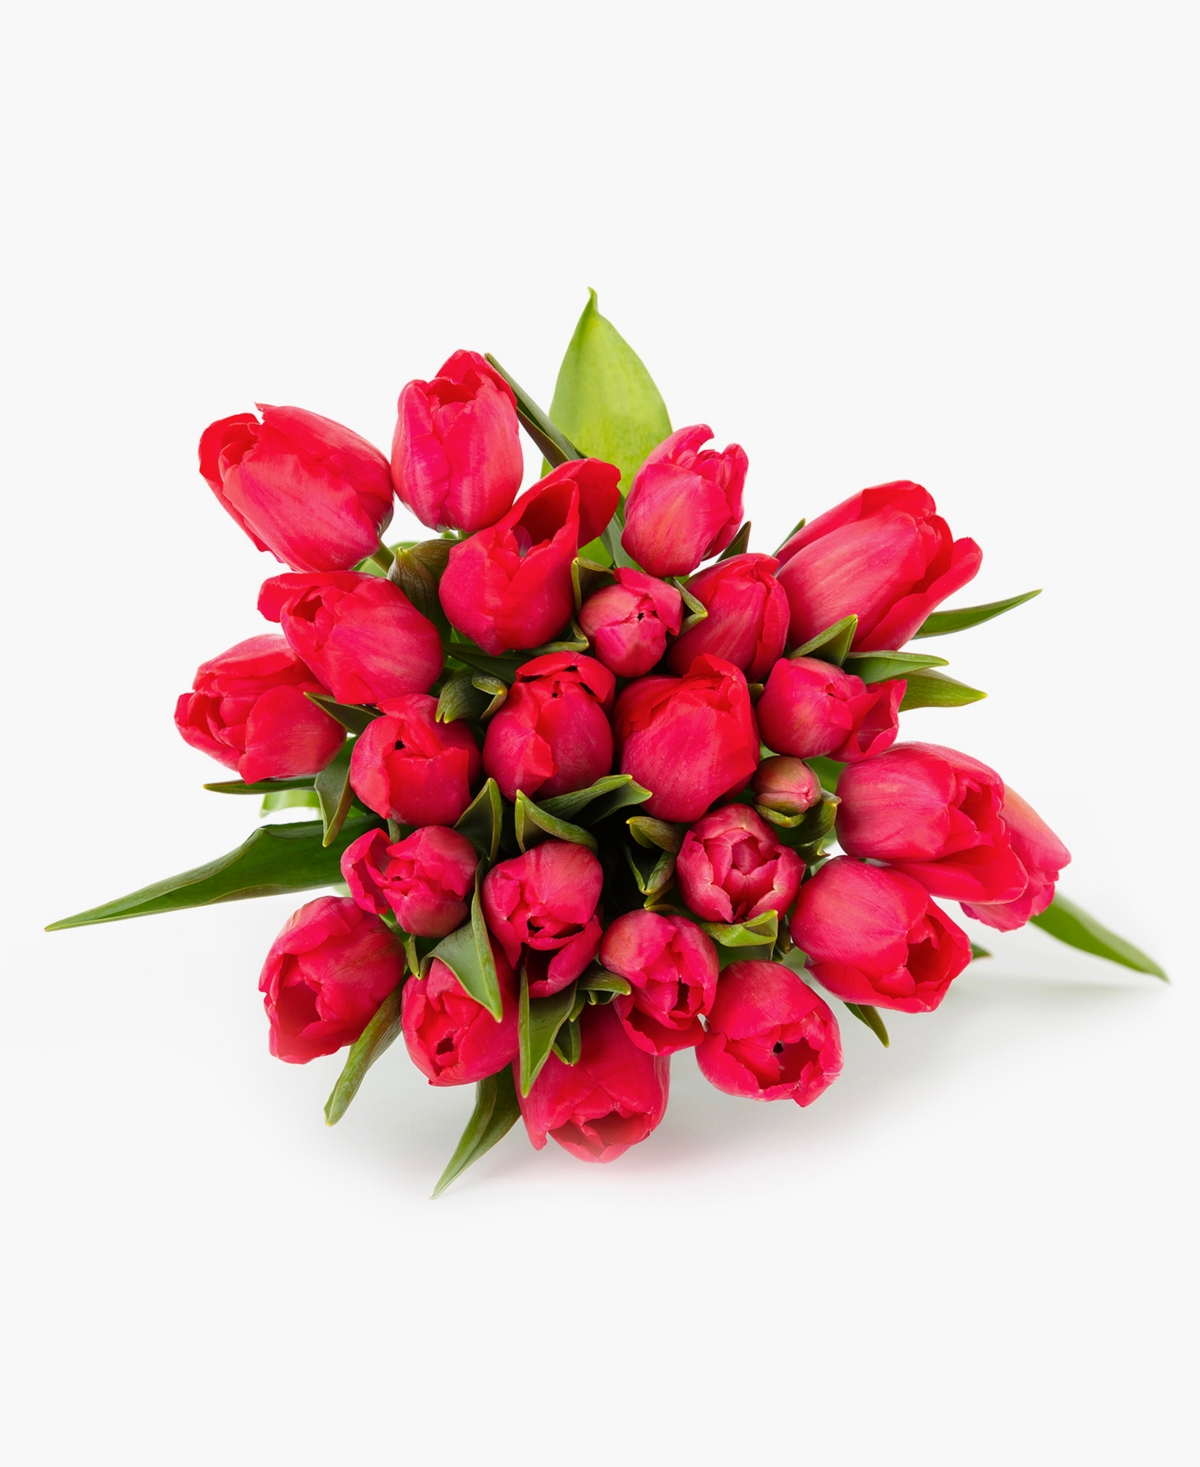 Radiant Red Tulips Fresh Flower Bouquet